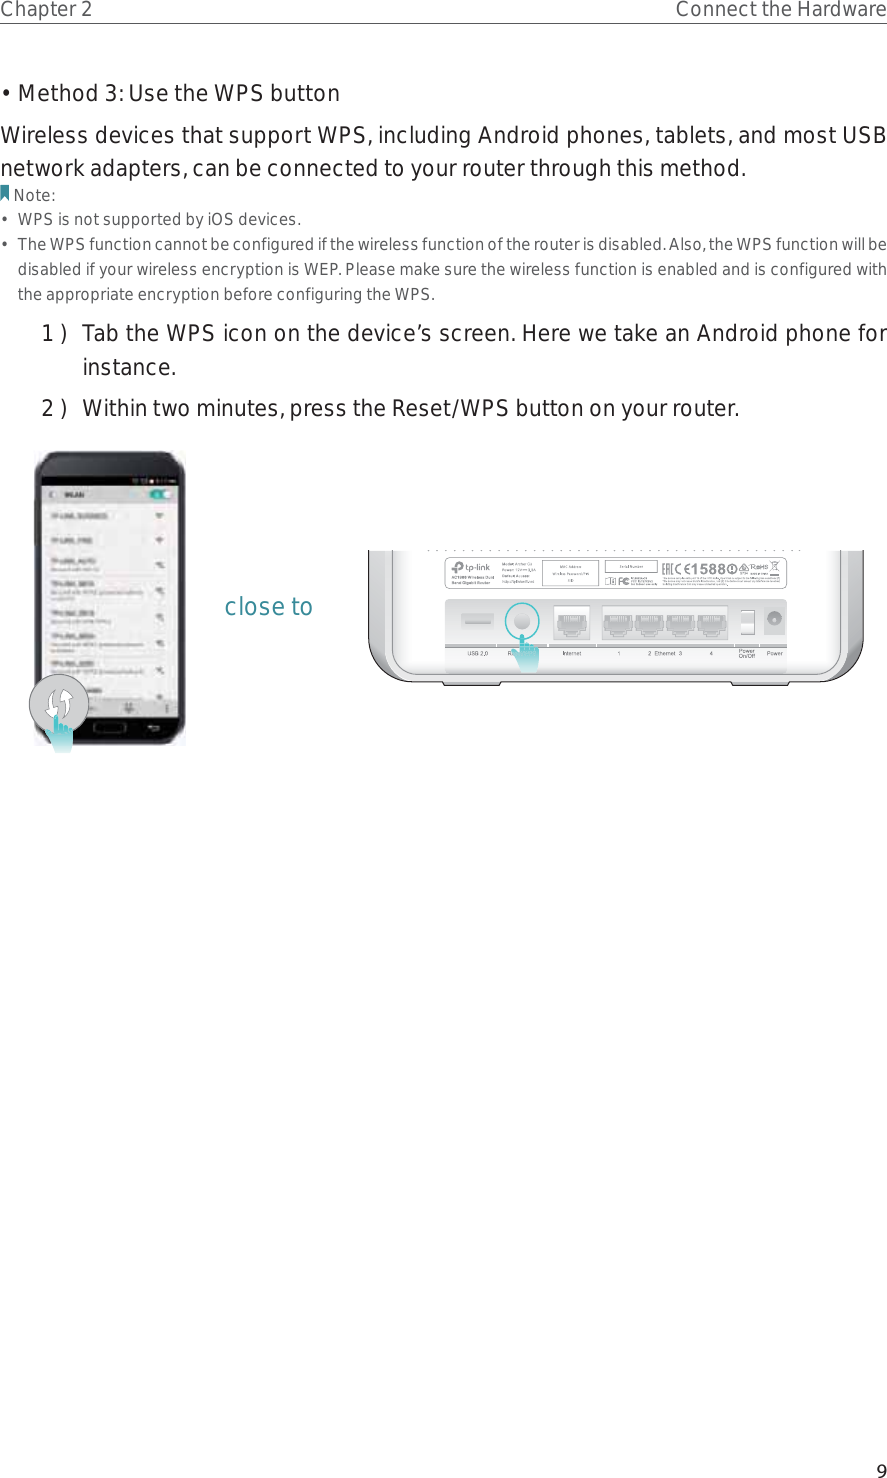 9Chapter 2 Connect the Hardware• Method 3: Use the WPS buttonWireless devices that support WPS, including Android phones, tablets, and most USB network adapters, can be connected to your router through this method.Note:•  WPS is not supported by iOS devices.•  The WPS function cannot be configured if the wireless function of the router is disabled. Also, the WPS function will be disabled if your wireless encryption is WEP. Please make sure the wireless function is enabled and is configured with the appropriate encryption before configuring the WPS.1 )  Tab the WPS icon on the device’s screen. Here we take an Android phone for instance.2 )  Within two minutes, press the Reset/WPS button on your router. close to